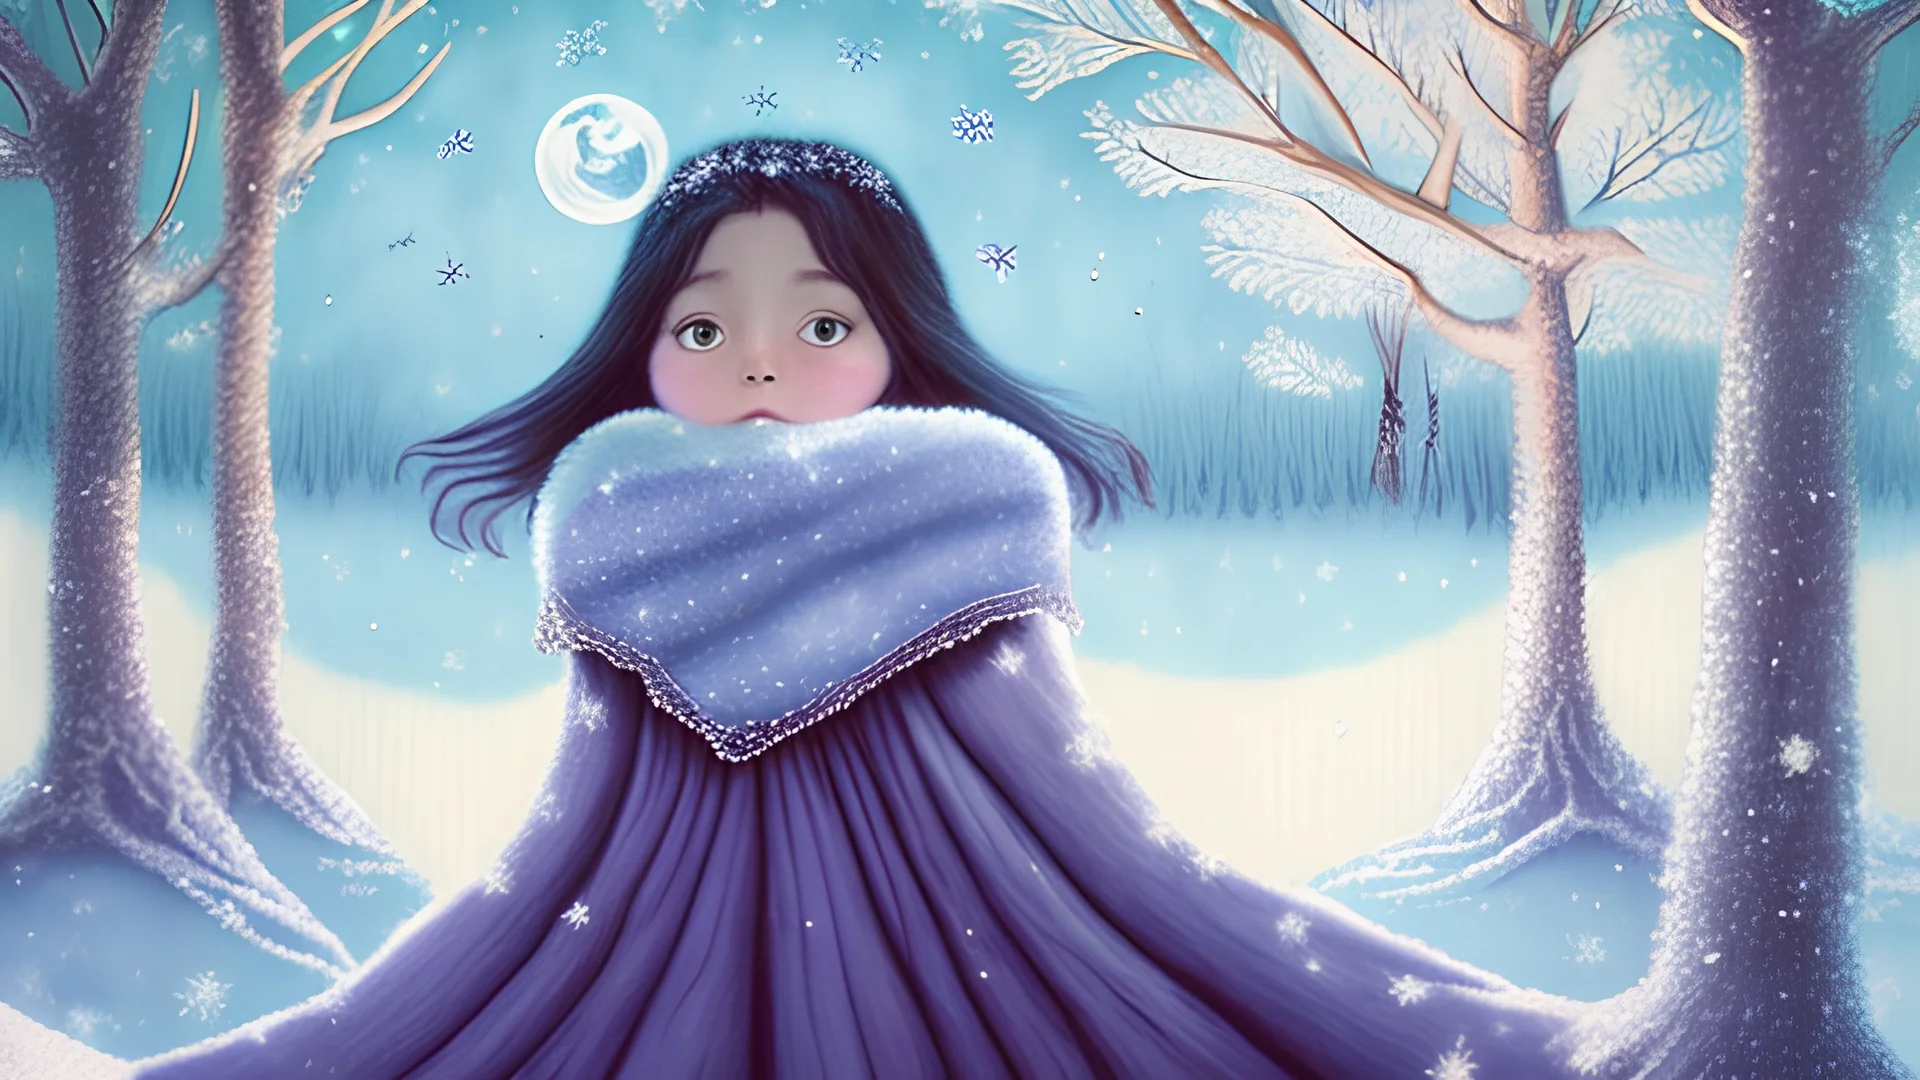 children's book style, each day, Luna drifted lazily through the frigid air, her descent a graceful dance. As she fell, she beheld the world below, a landscape transformed by winter's touch. The trees stood as silent sentinels, their branches adorned with glistening jewels of ice, and the ground lay beneath a blanket of pristine white.